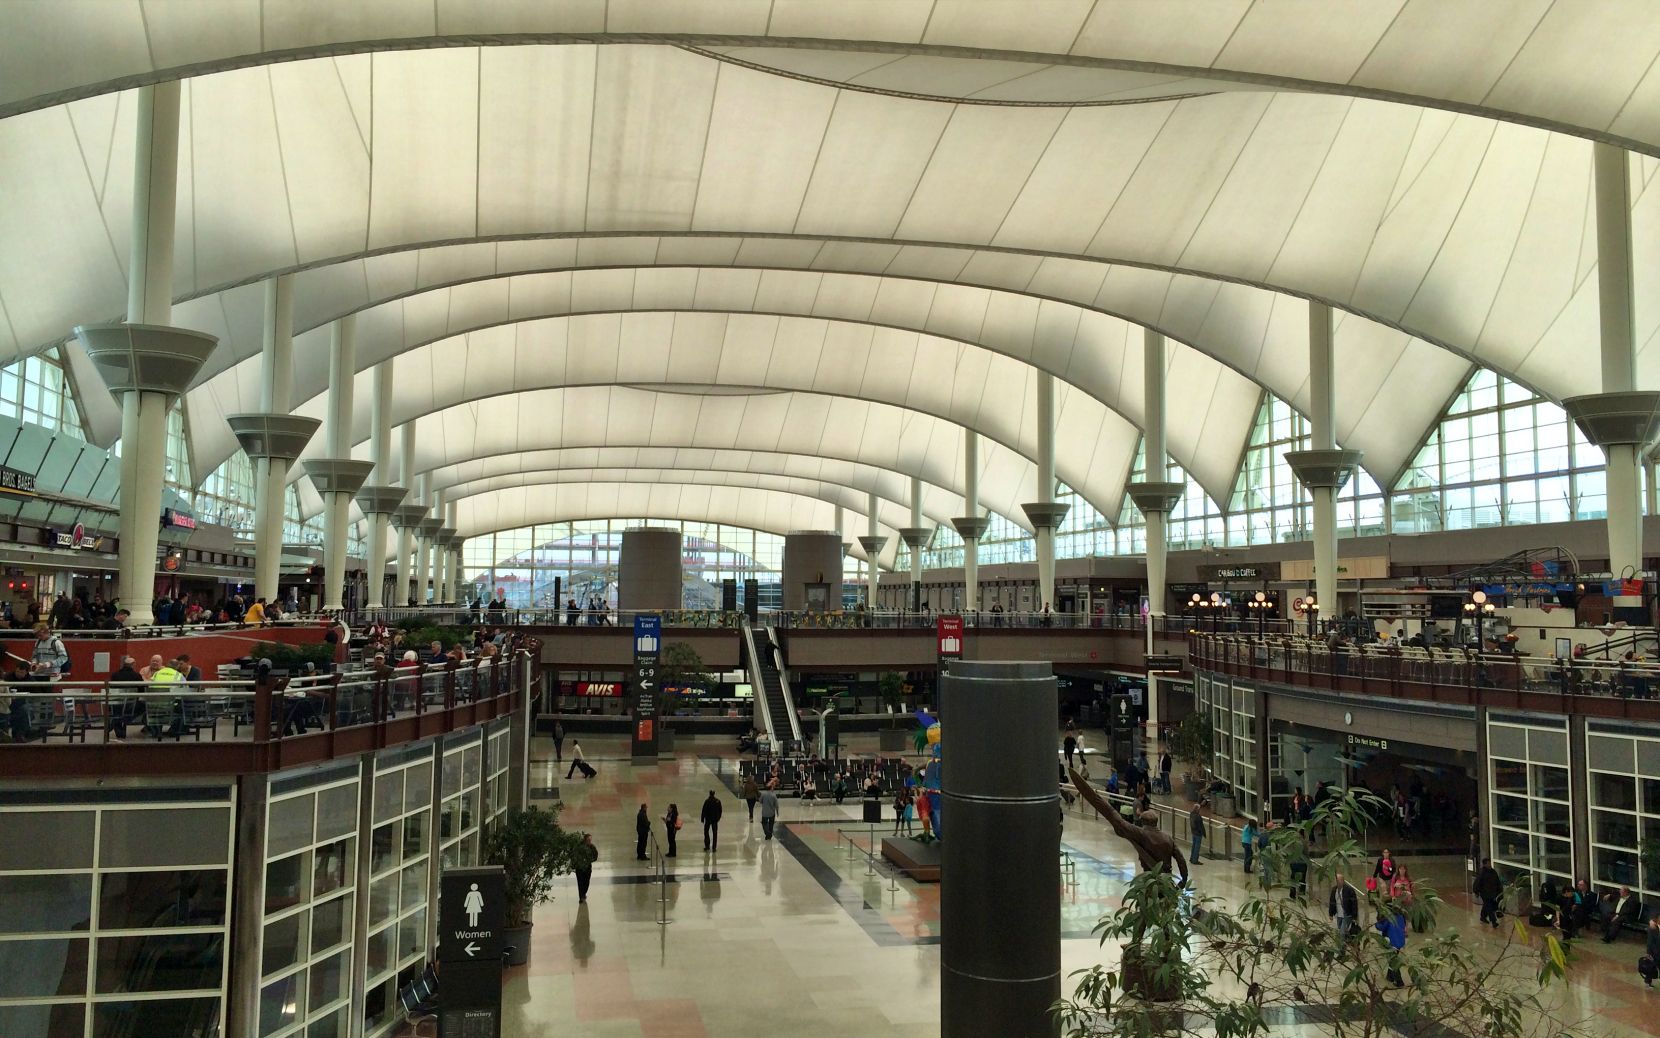 Interior of the tent-roofed landside terminal.